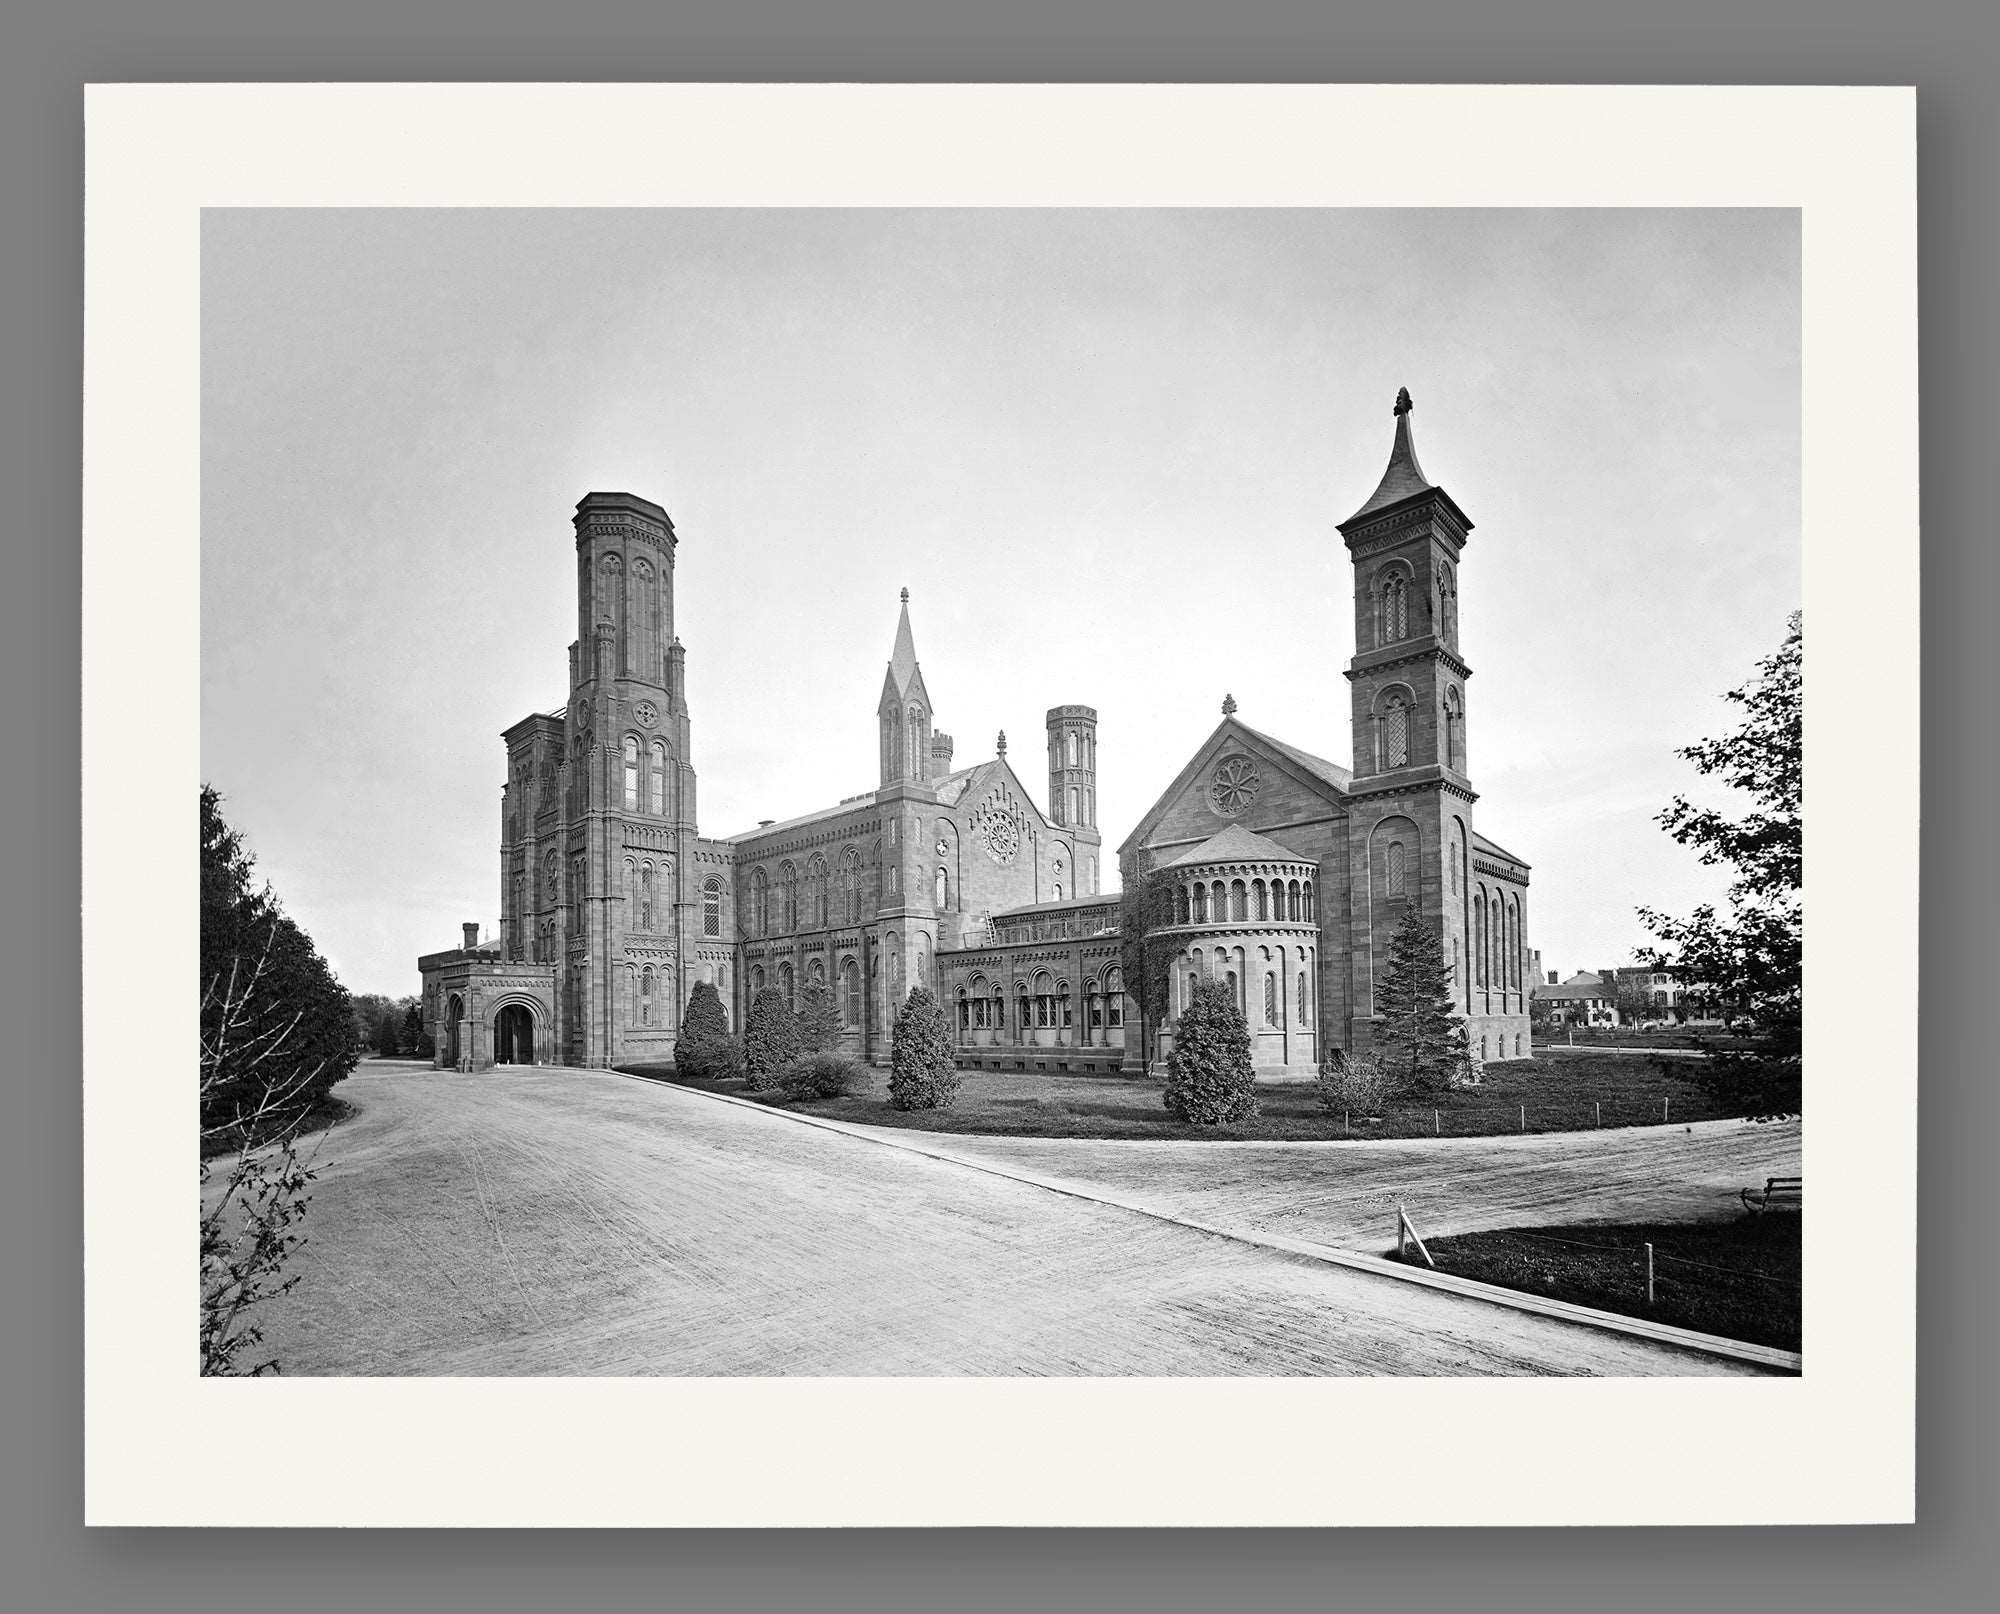 A paper print mockup featuring a vintage image of the Smithsonian Castle